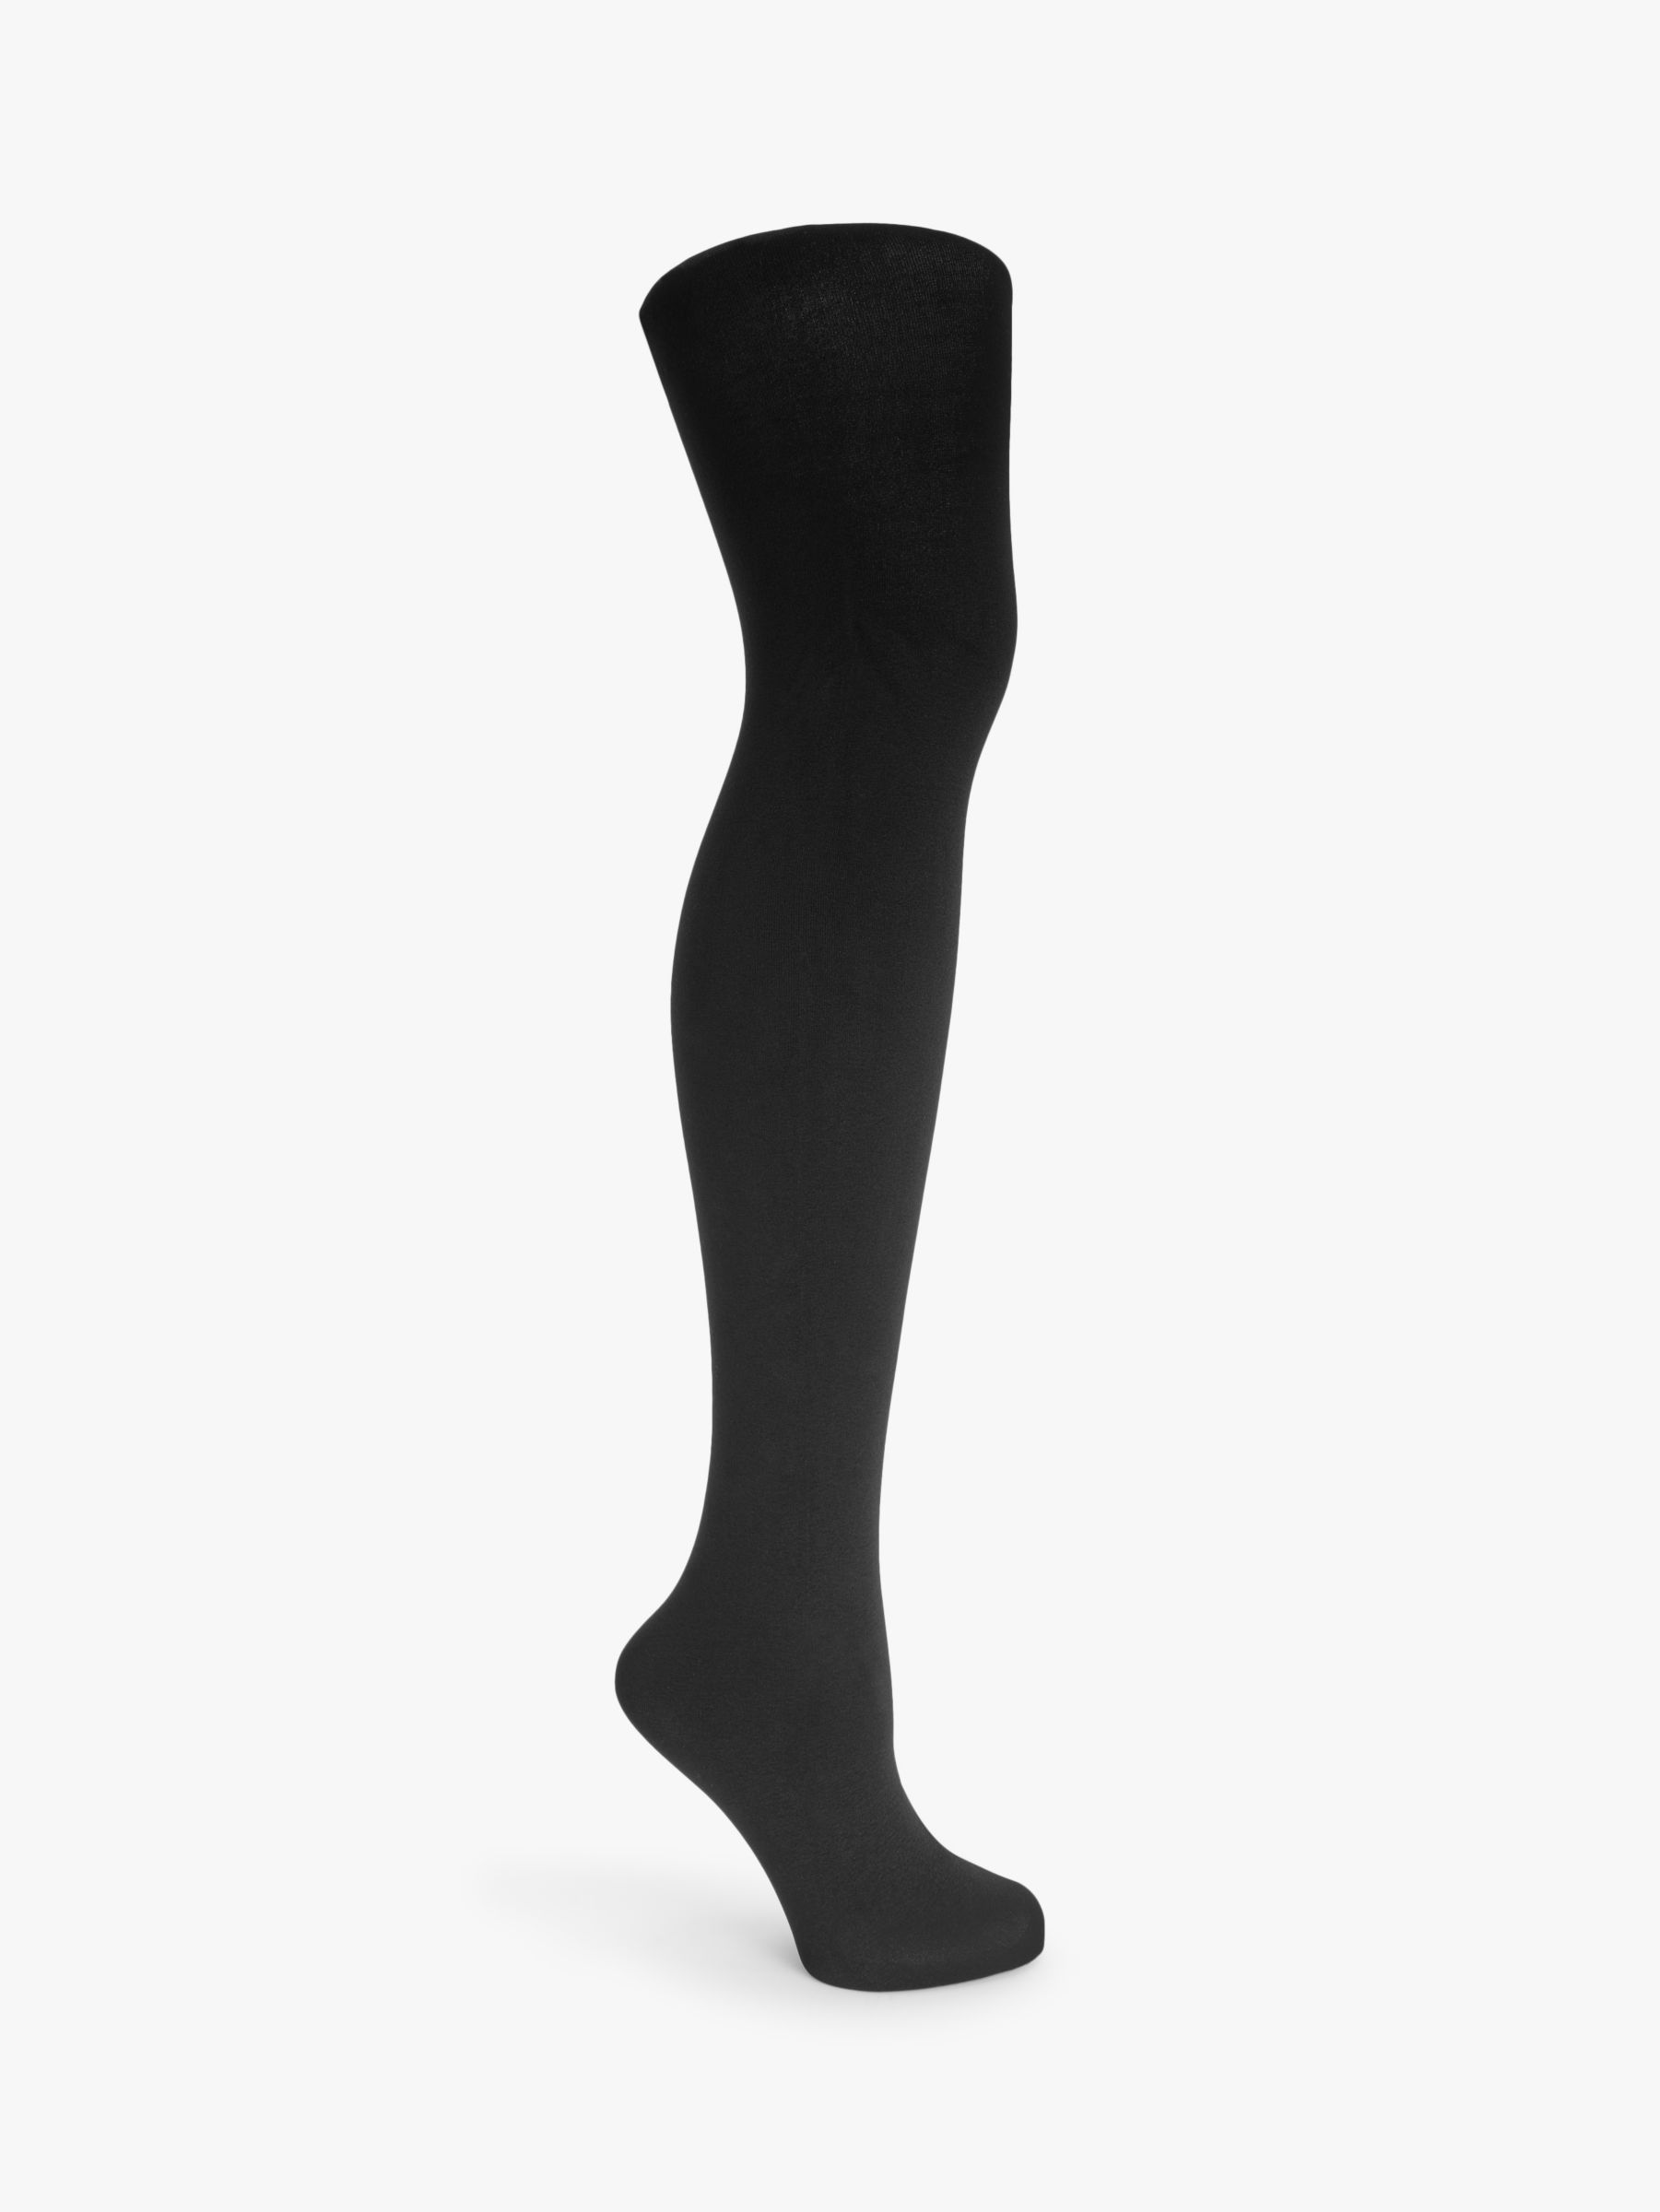 Hosiery of different finishes - from Matte to Shiny ()